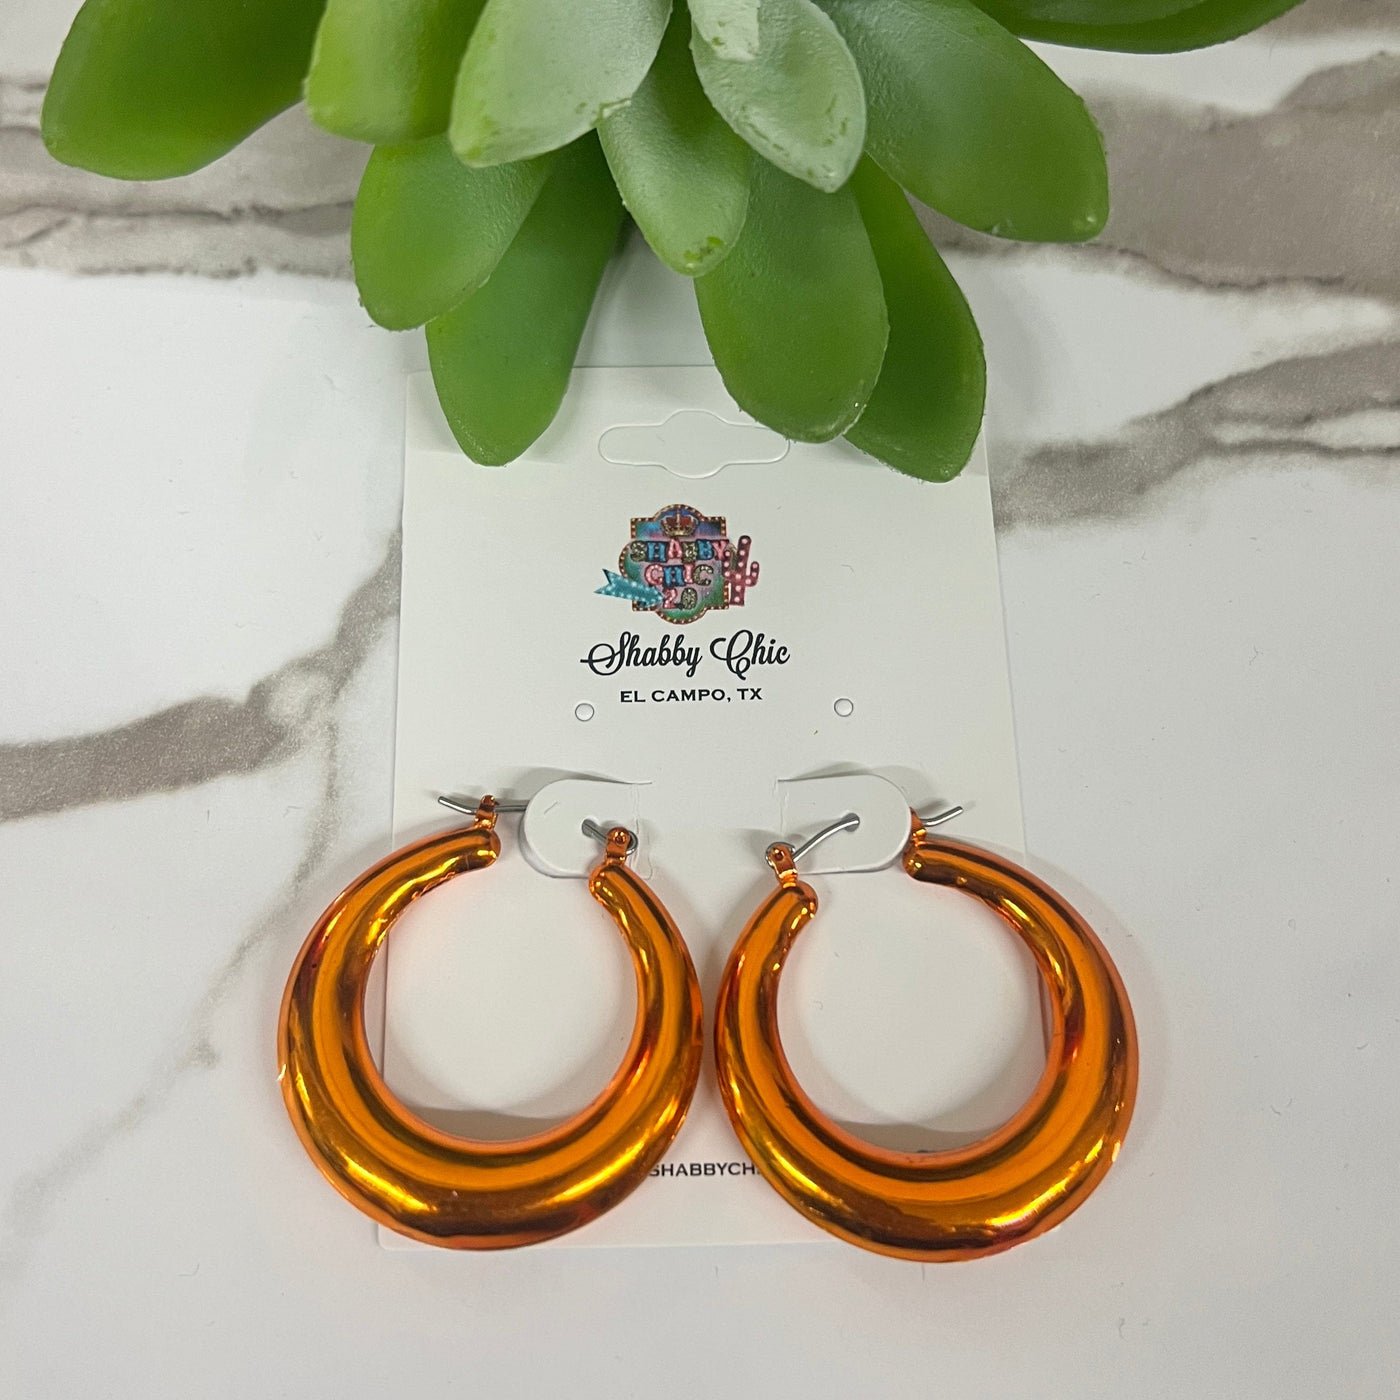 Colorful Hoop Earrings Shabby Chic Boutique and Tanning Salon Orange